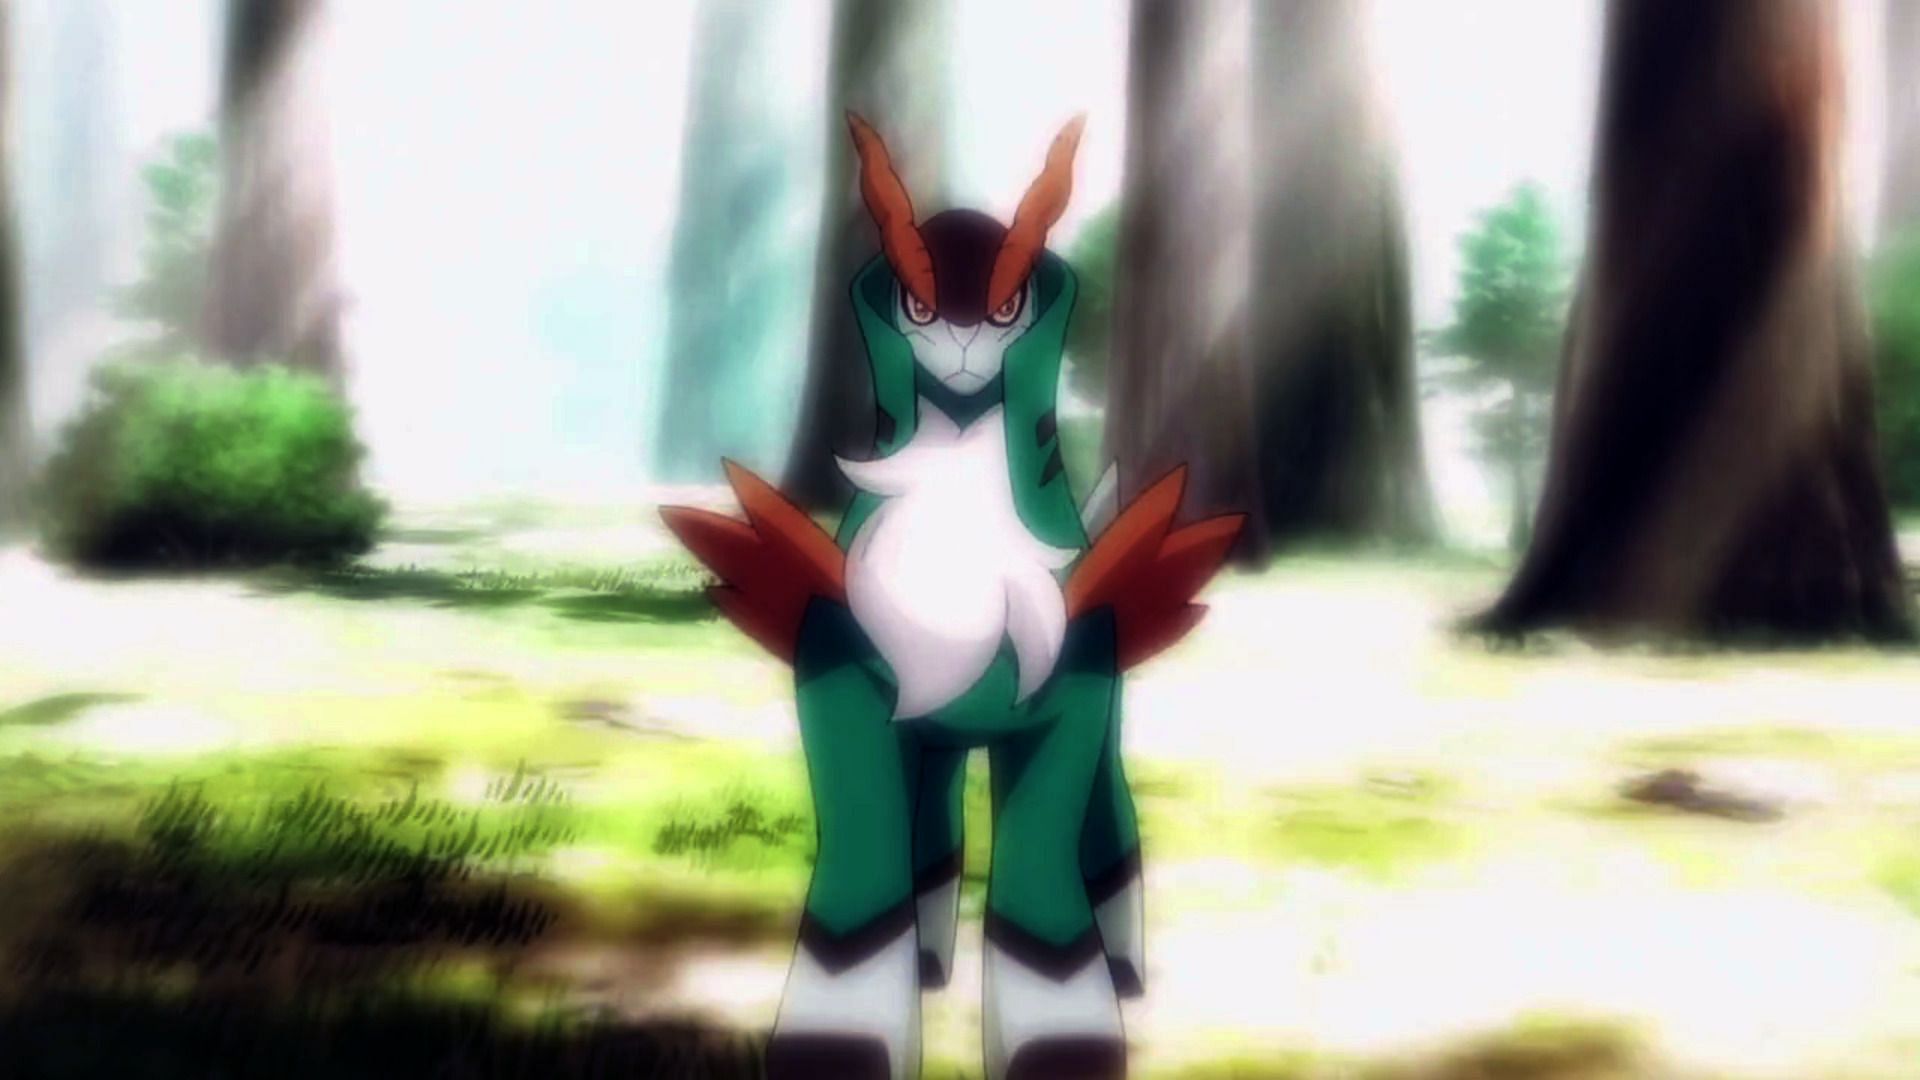 Cobalion as it appears in the movie (Image via The Pokemon Company)